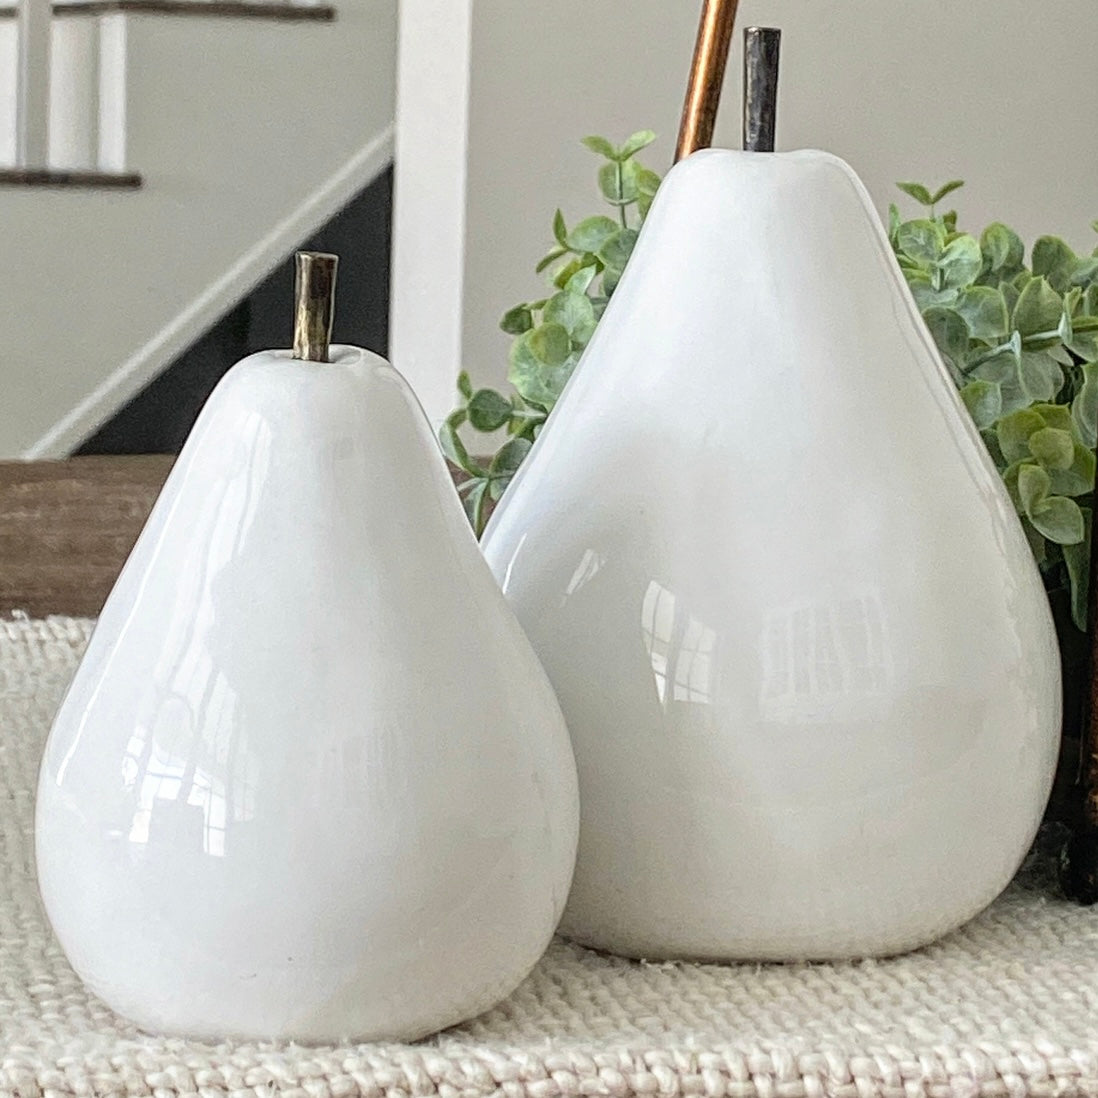 Ceramic Pear, choose from 2 sizes